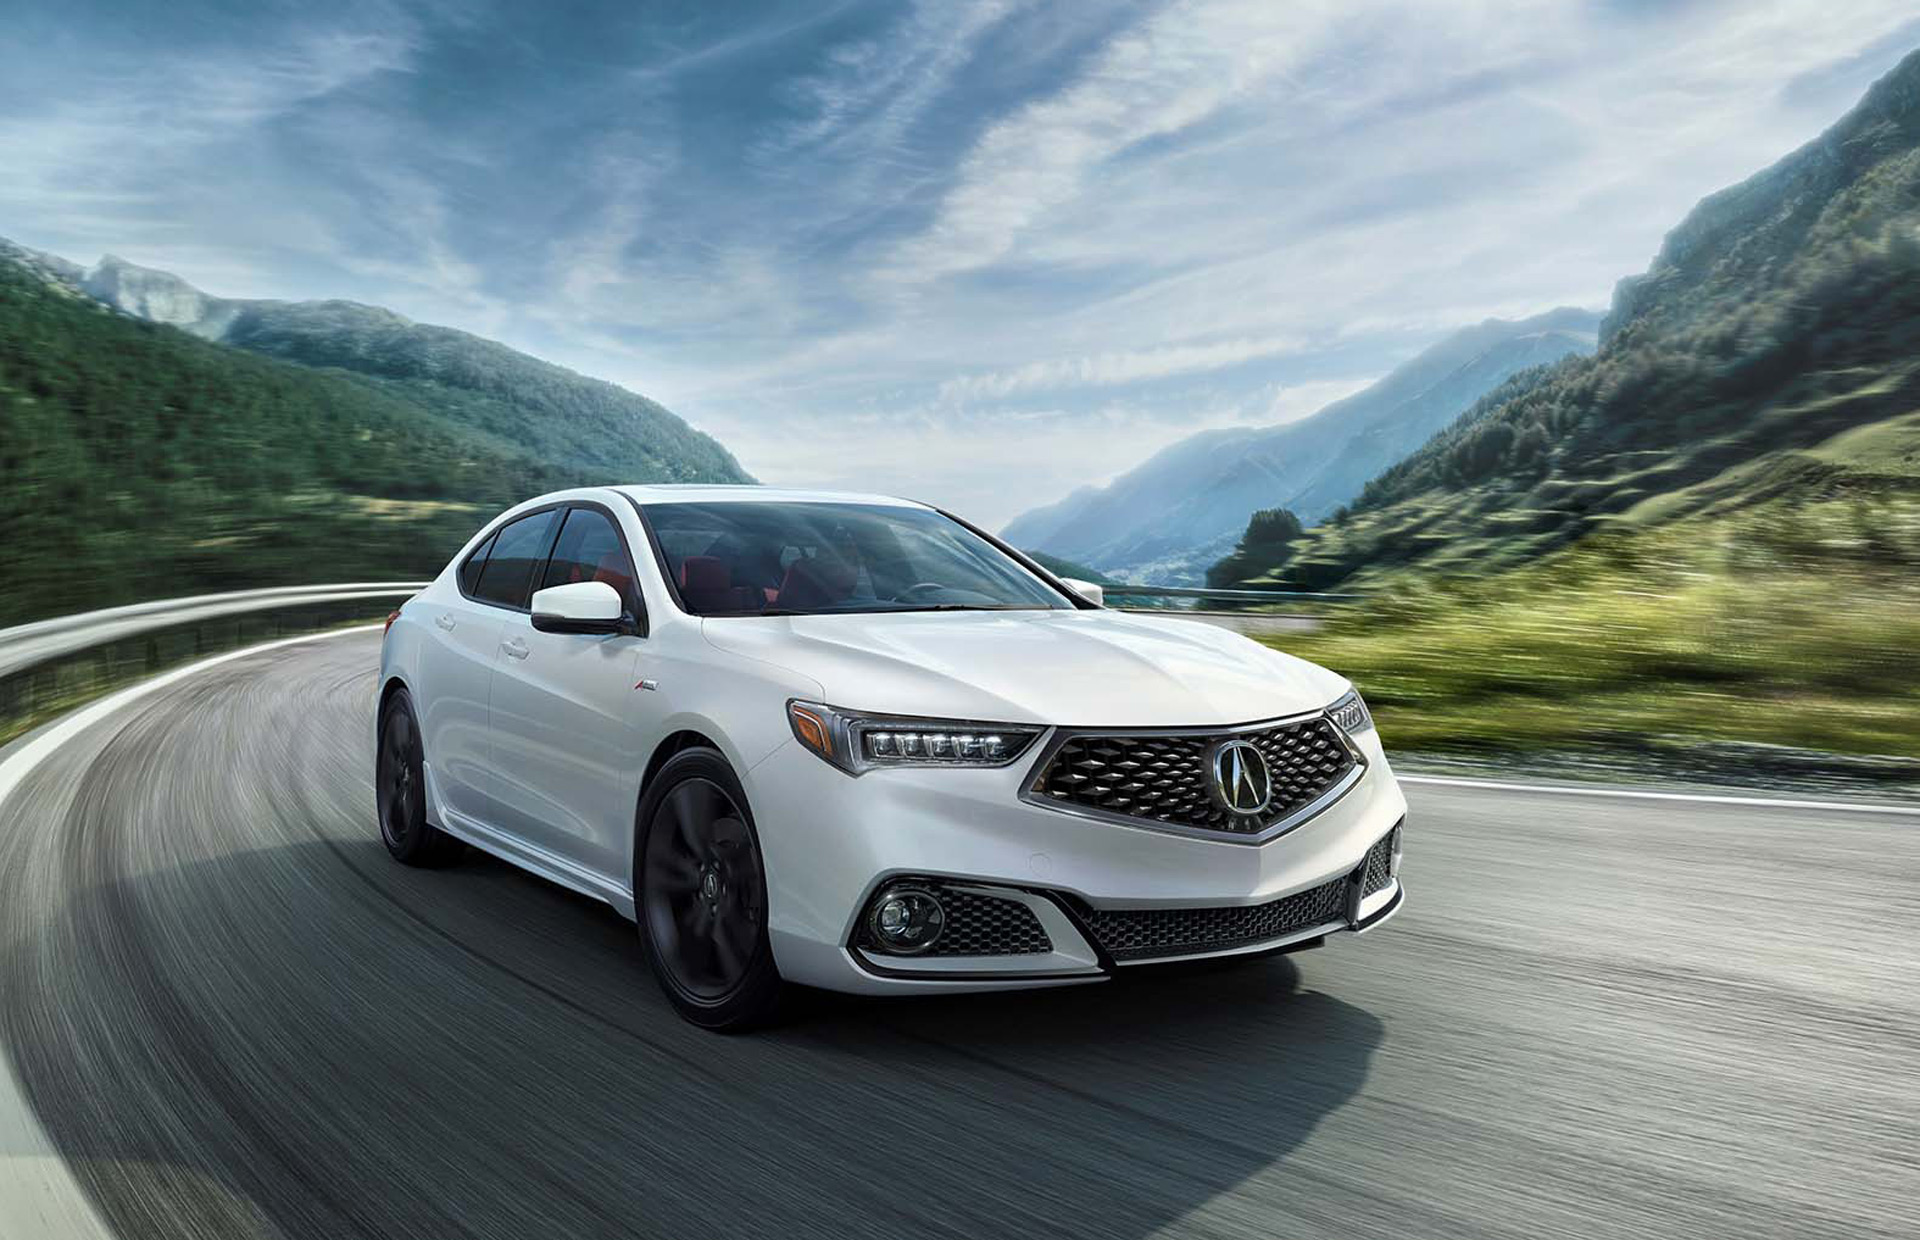 2018 Acura TLX video preview1920 x 1240